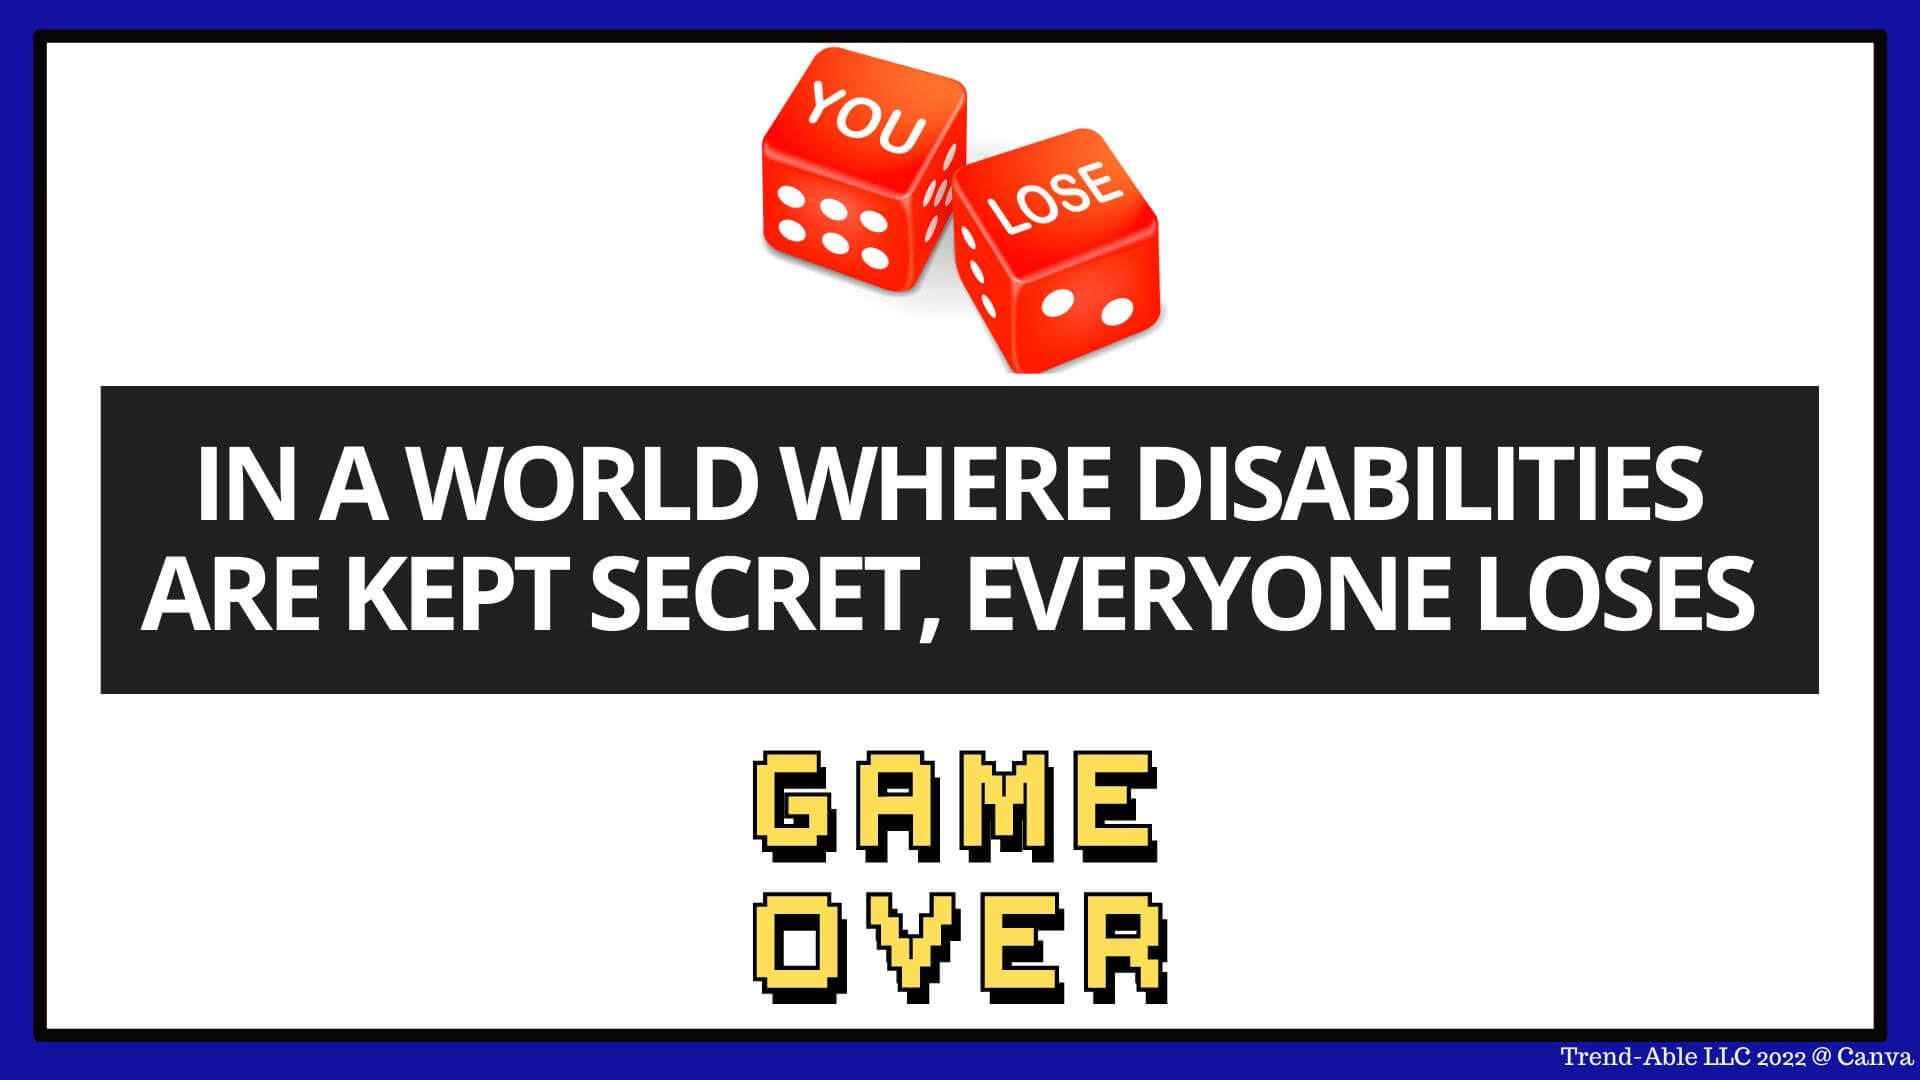 Gambling On Humanity With An Invisible Disability